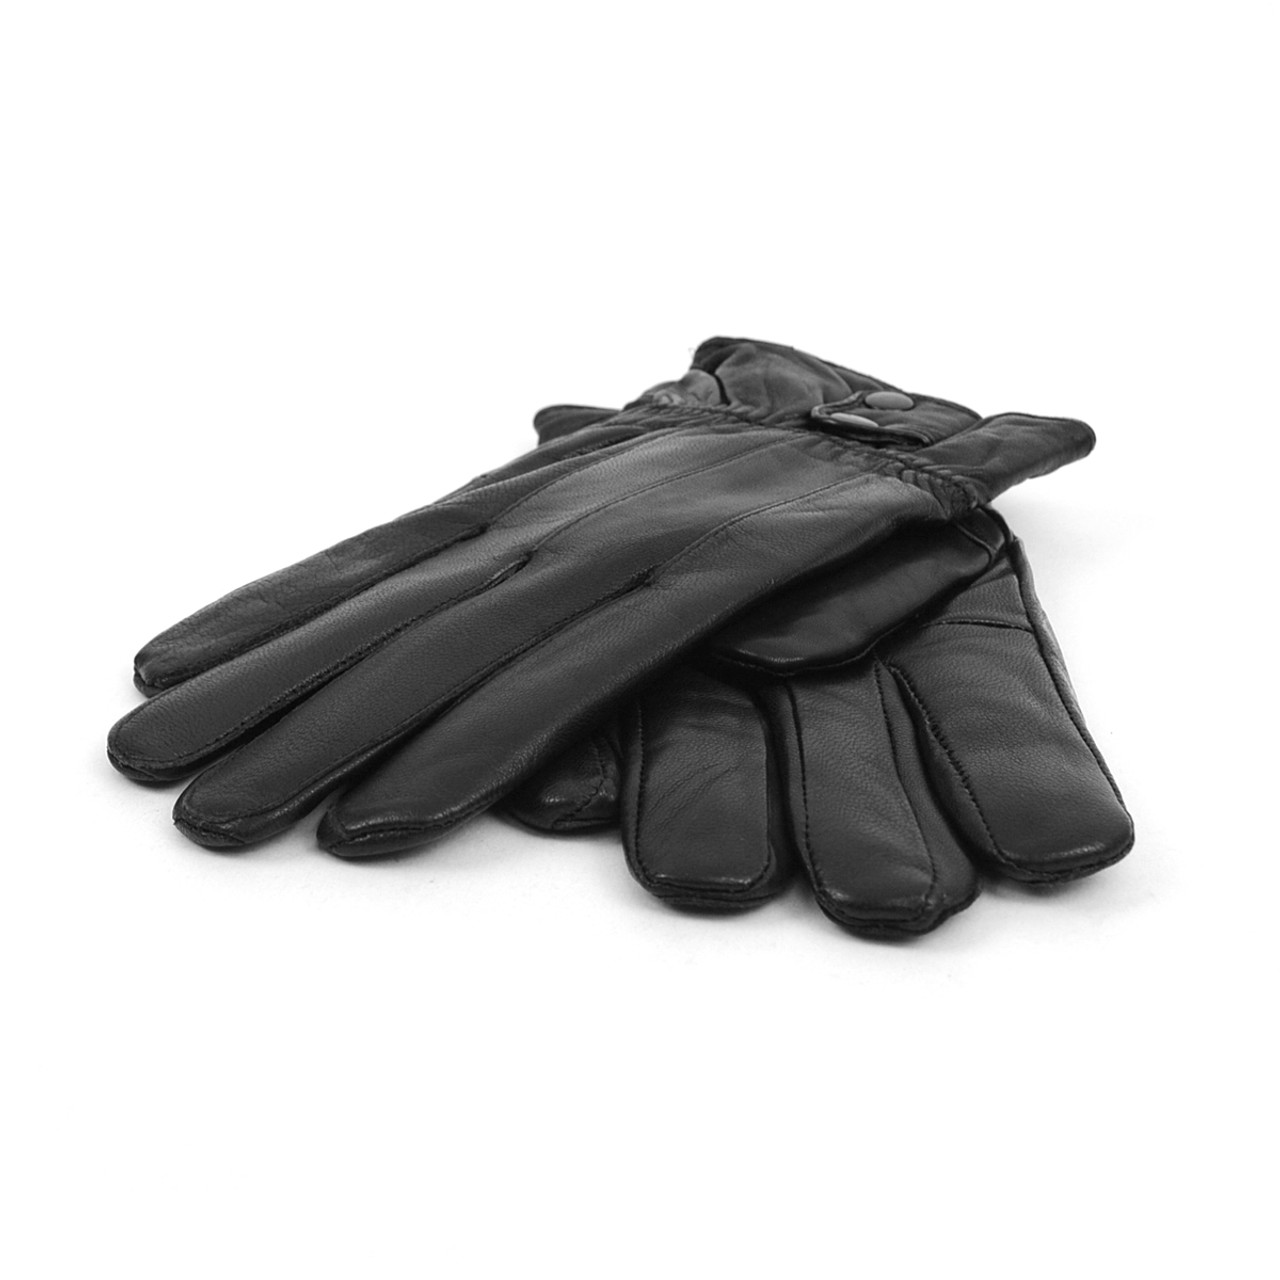 Mens Warm Winter Gloves Dress Glove Thermal Lining Genuine Leather